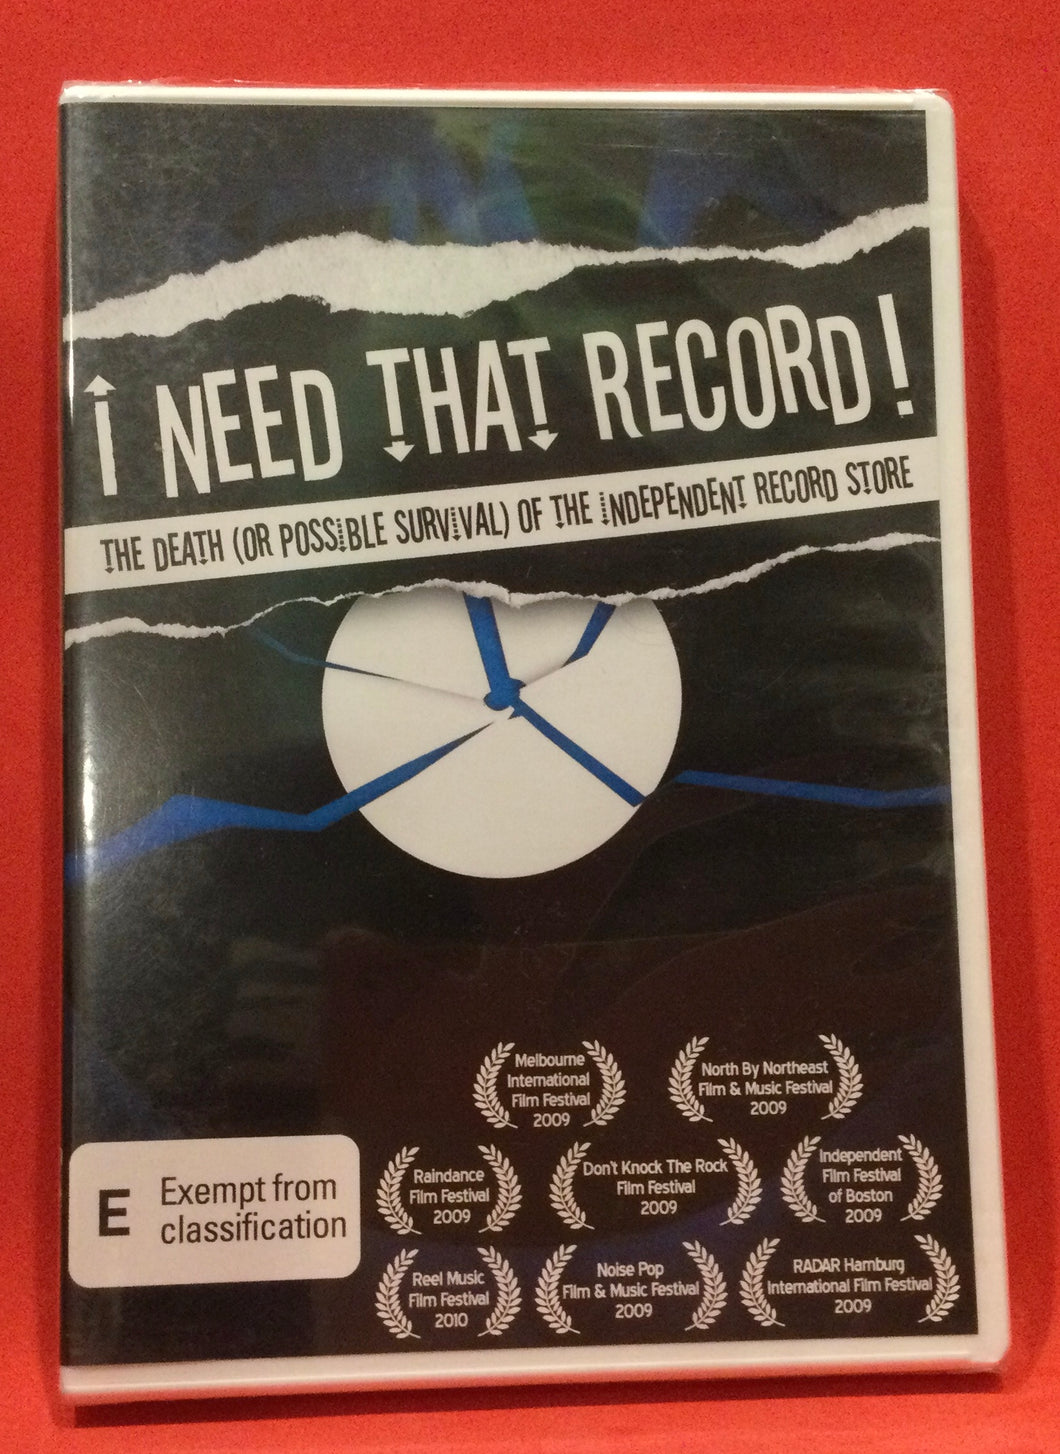 I NEED THAT RECORD! - THE DEATH (OR POSSIBLE SURVIVAL) OF THE INDEPENDENT RECORD STORE - DVD (SEALED)